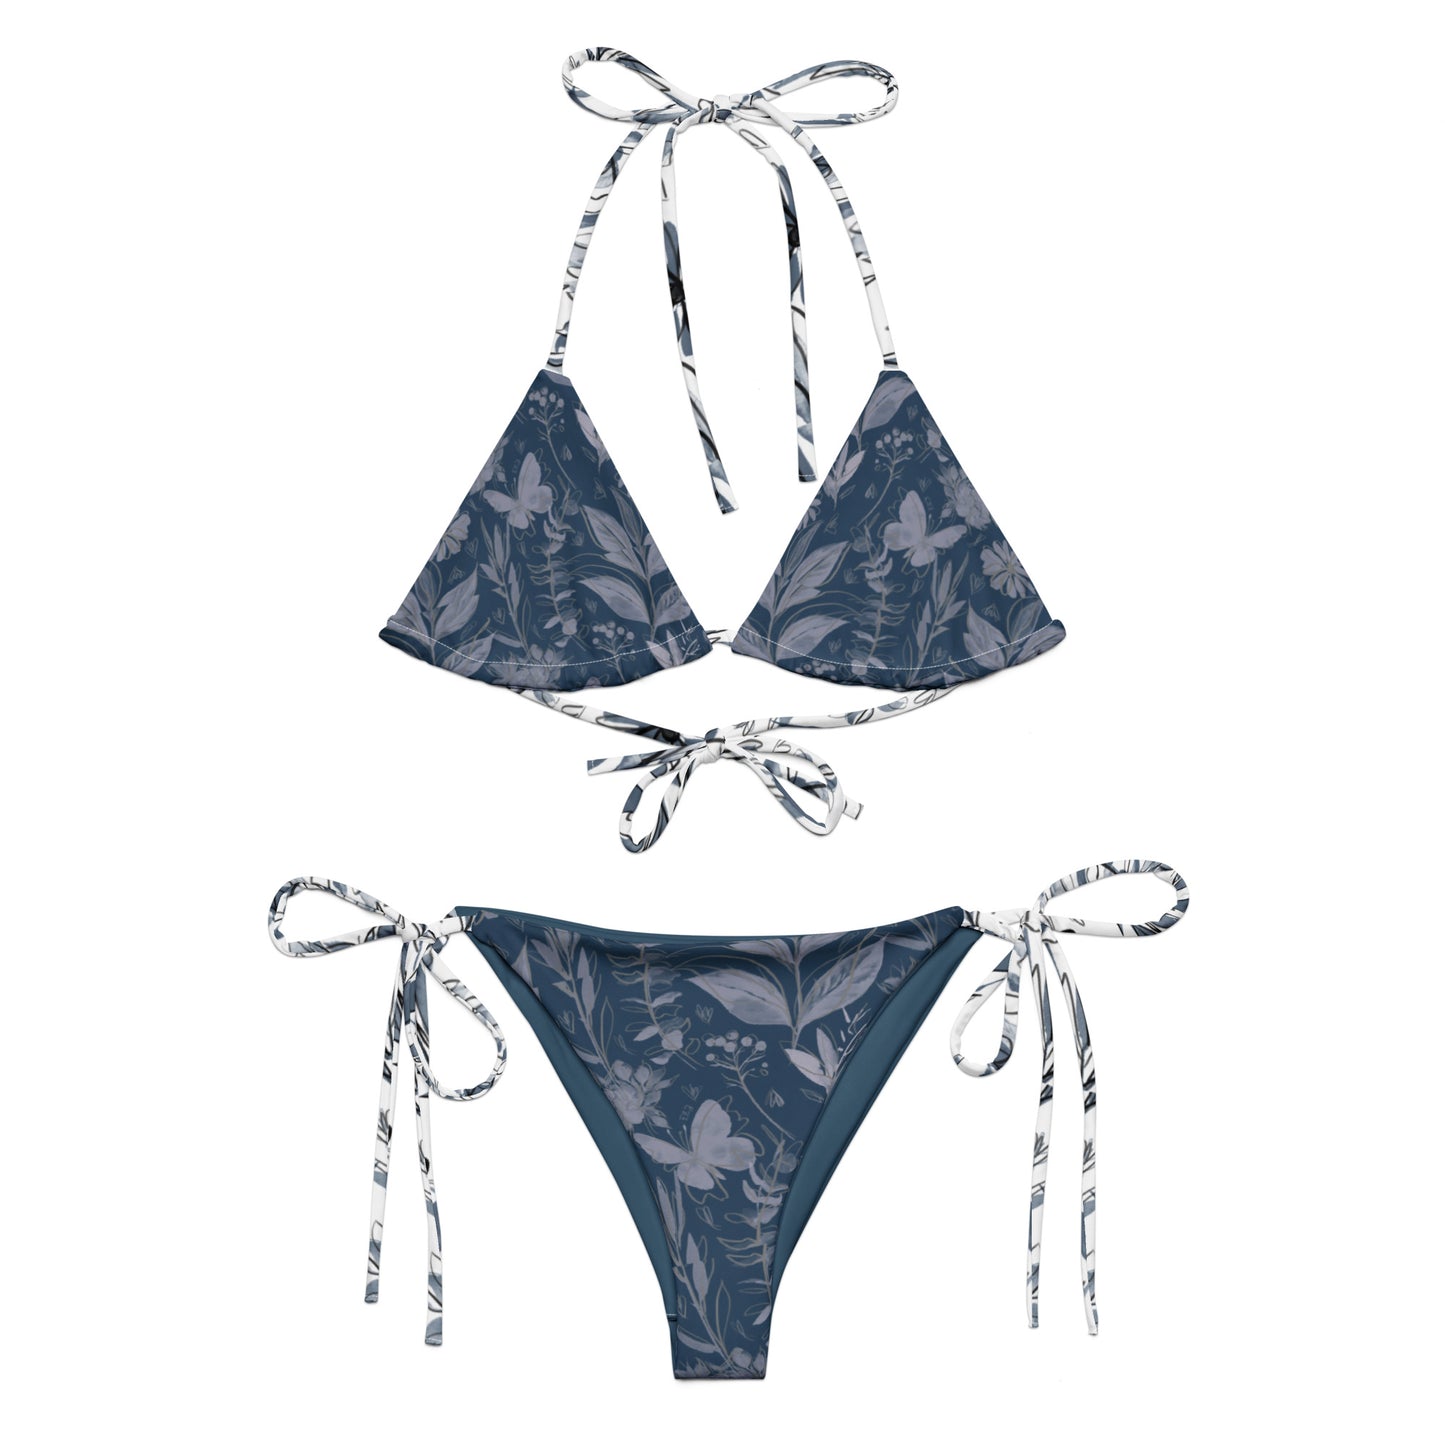 Watercolor Blue & White recycled string bikini. Houston Collection. Design hand-painted by the Designer Maria Alejandra Echenique